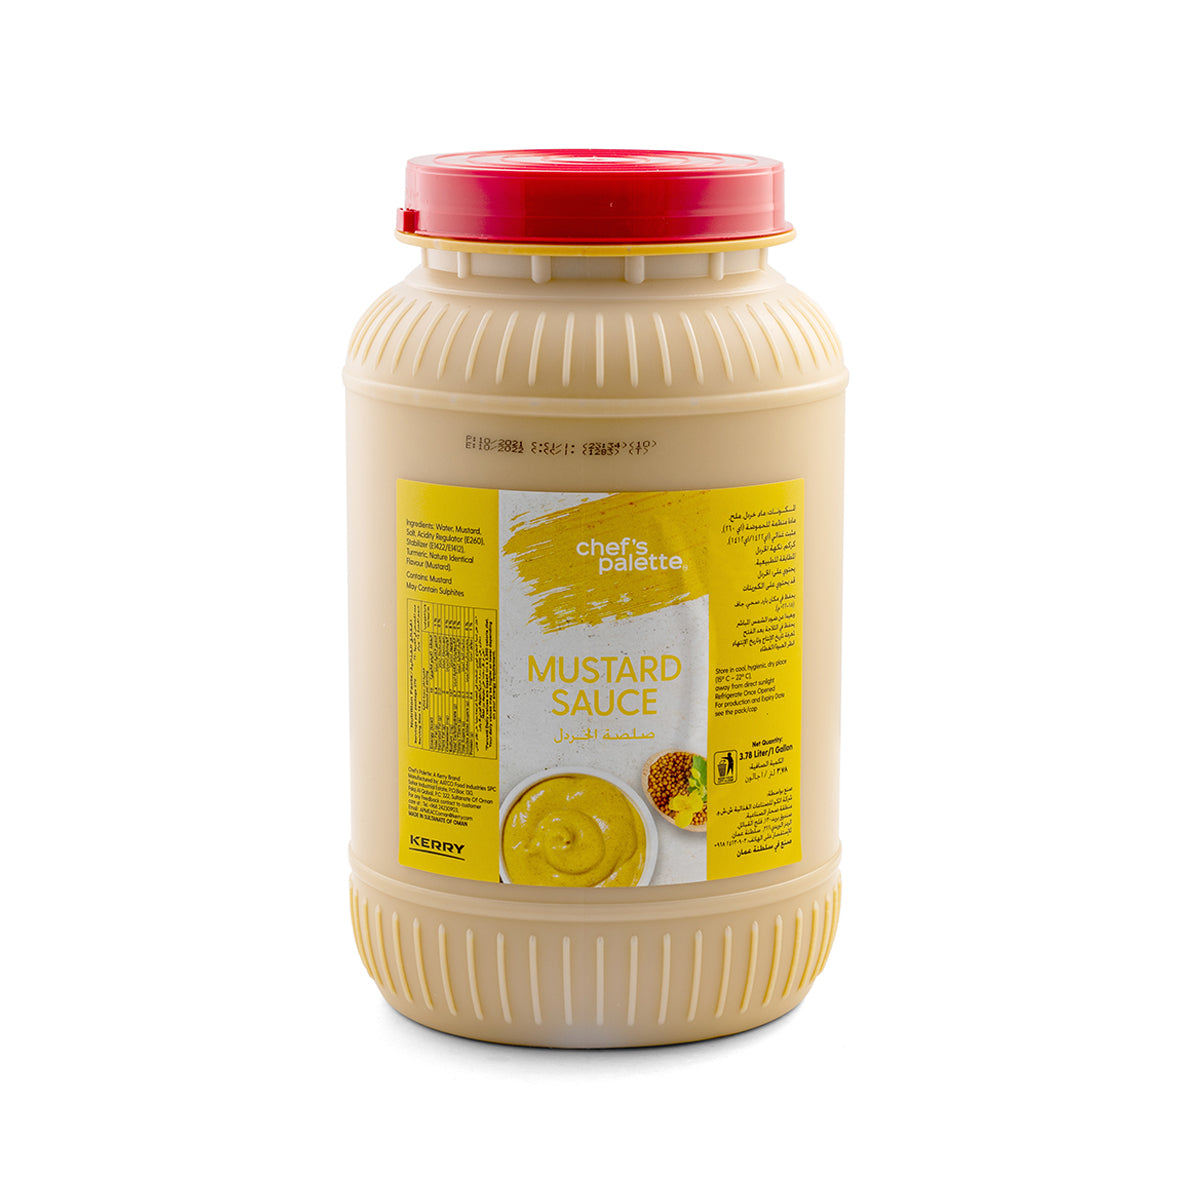 Sauce Cheezy-easy Nawhal's 950 ml